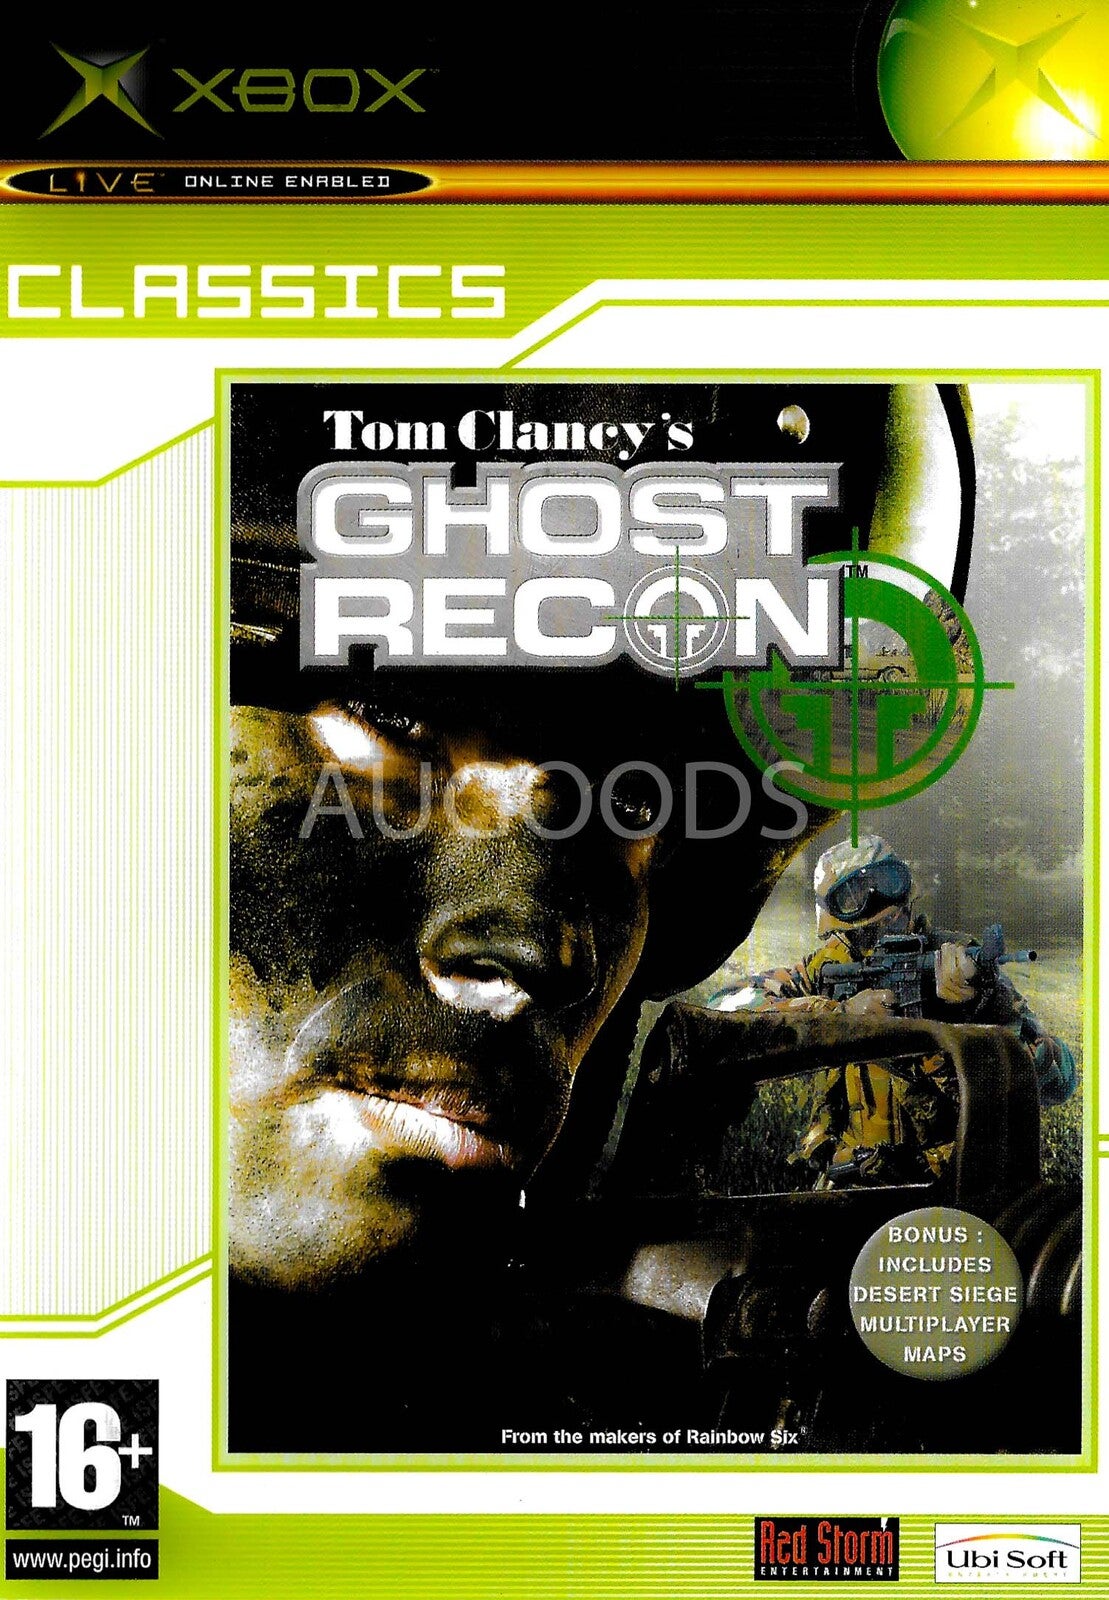 Tom Clancy's GHOST RECON Xbox 360 PRE-OWNED GAME: GREAT CONDITION